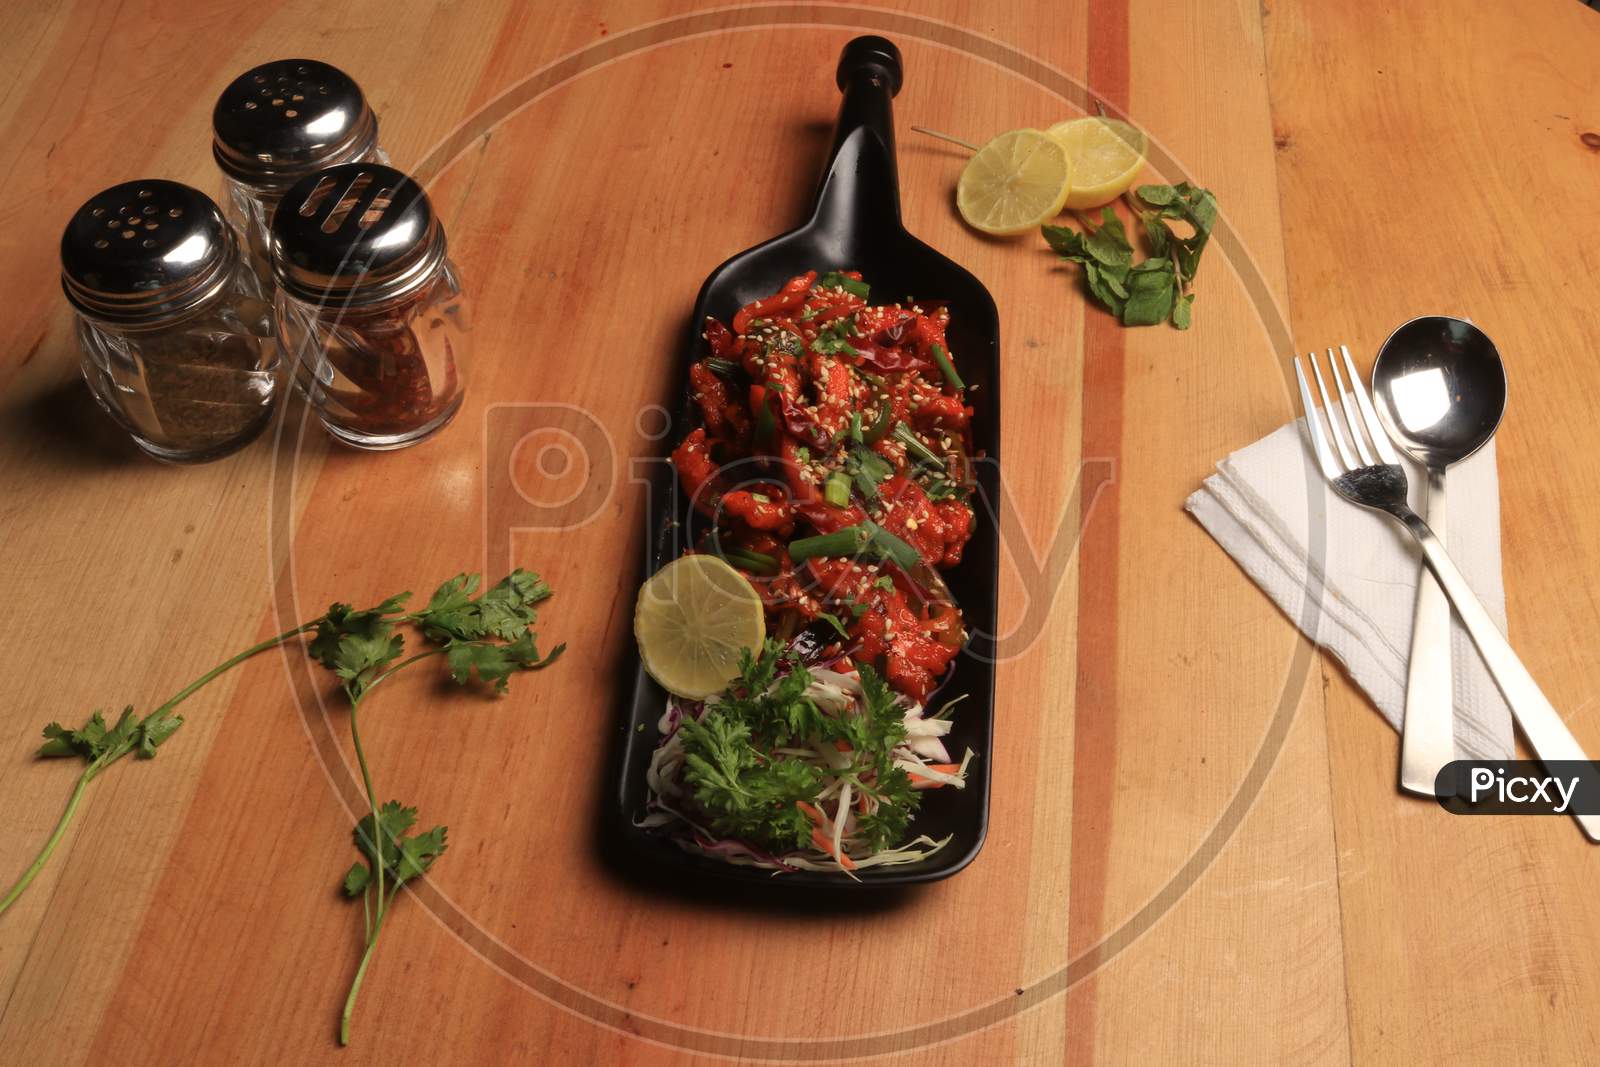 Indian Starter Chilli chicken, served in a plate. Selective focus